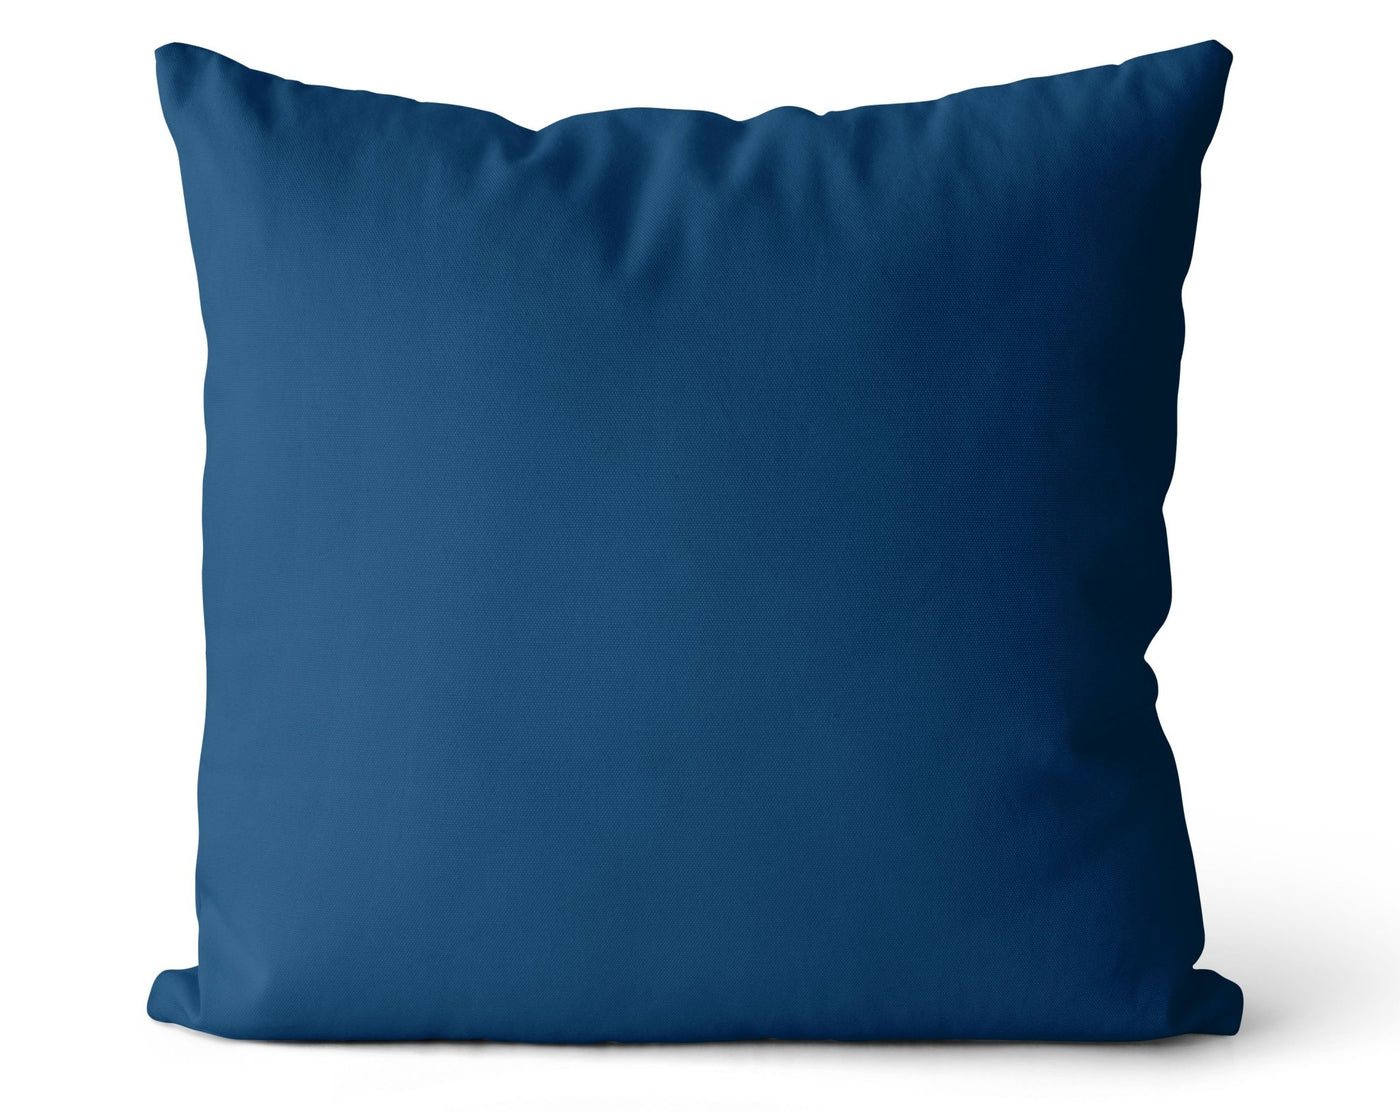 Exclusive Floral Blue Thibaut Inspired Pillow Throw Cover